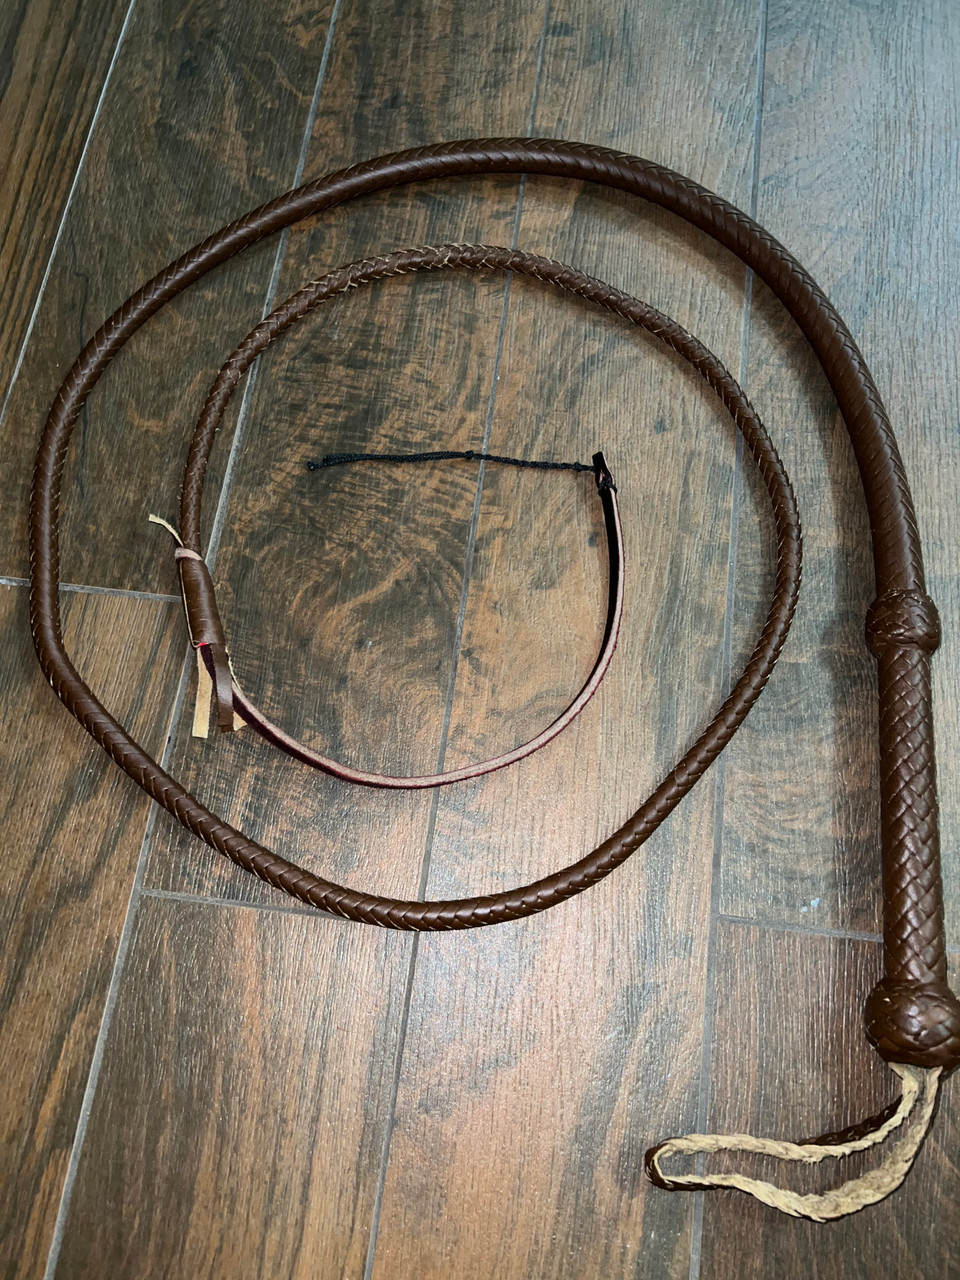 8ft Handcrafted Genuine Leather Bullwhip Whip Indiana Jones Cowboy + Wrist  Strap